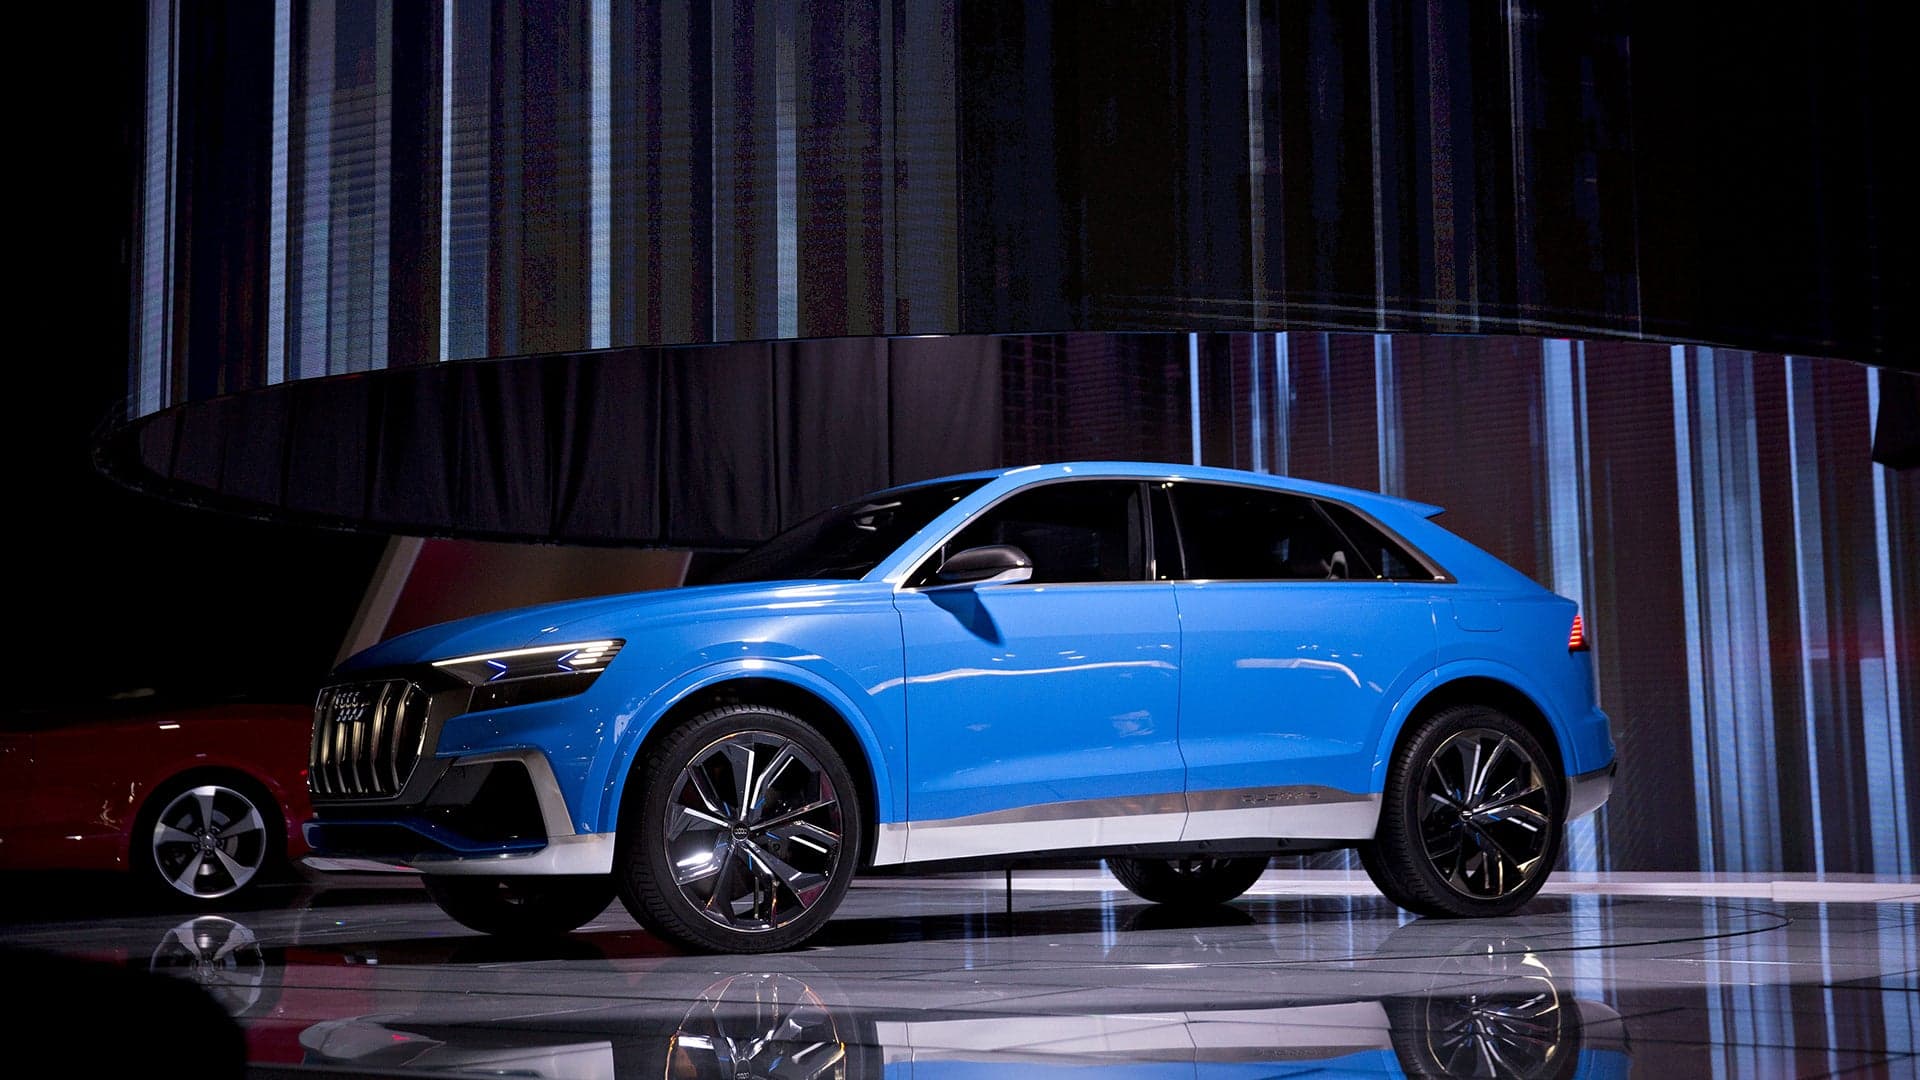 Audi Greenlights Production of Q8 SUV for 2020 Model Year Release